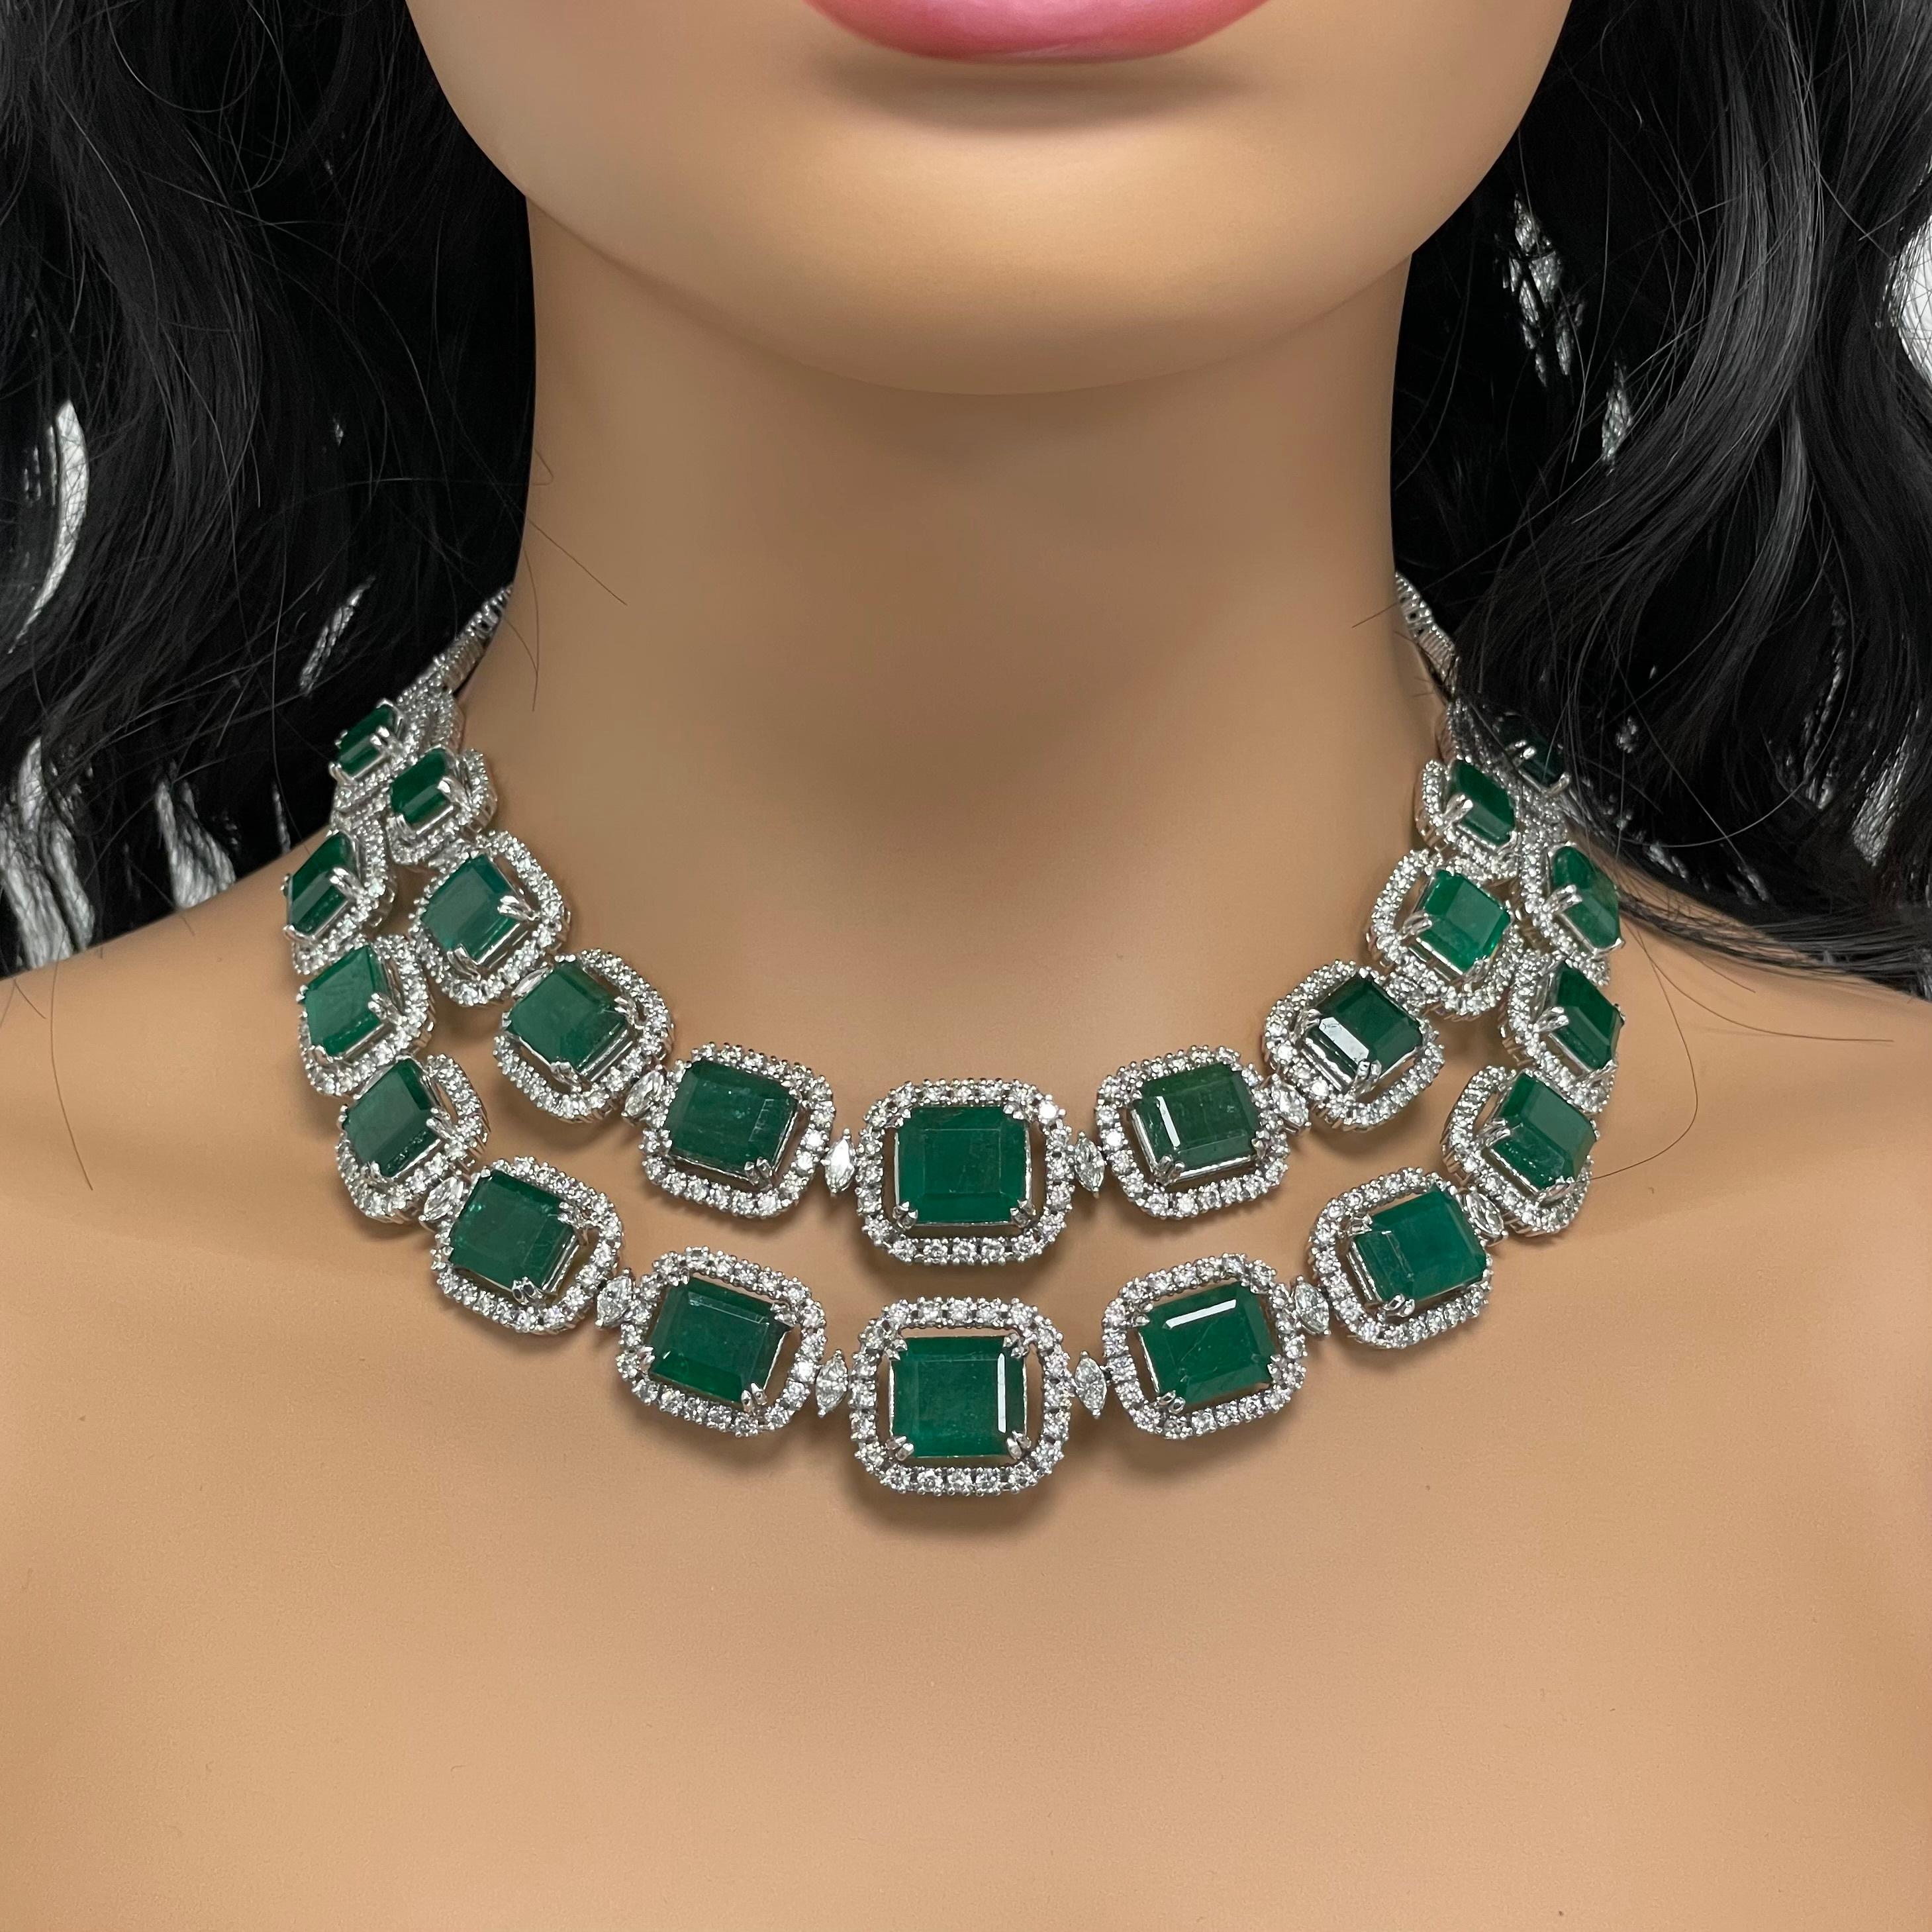 The Renee Emerald & Diamond Necklace is a unique and luxurious heritage double strand choker with royal green emeralds and diamonds set in white gold. 

Gemstones Type: Emerald
Gemstones Shape: Rectangular
Gemstones Weight: 135.78 ct
Gemstones